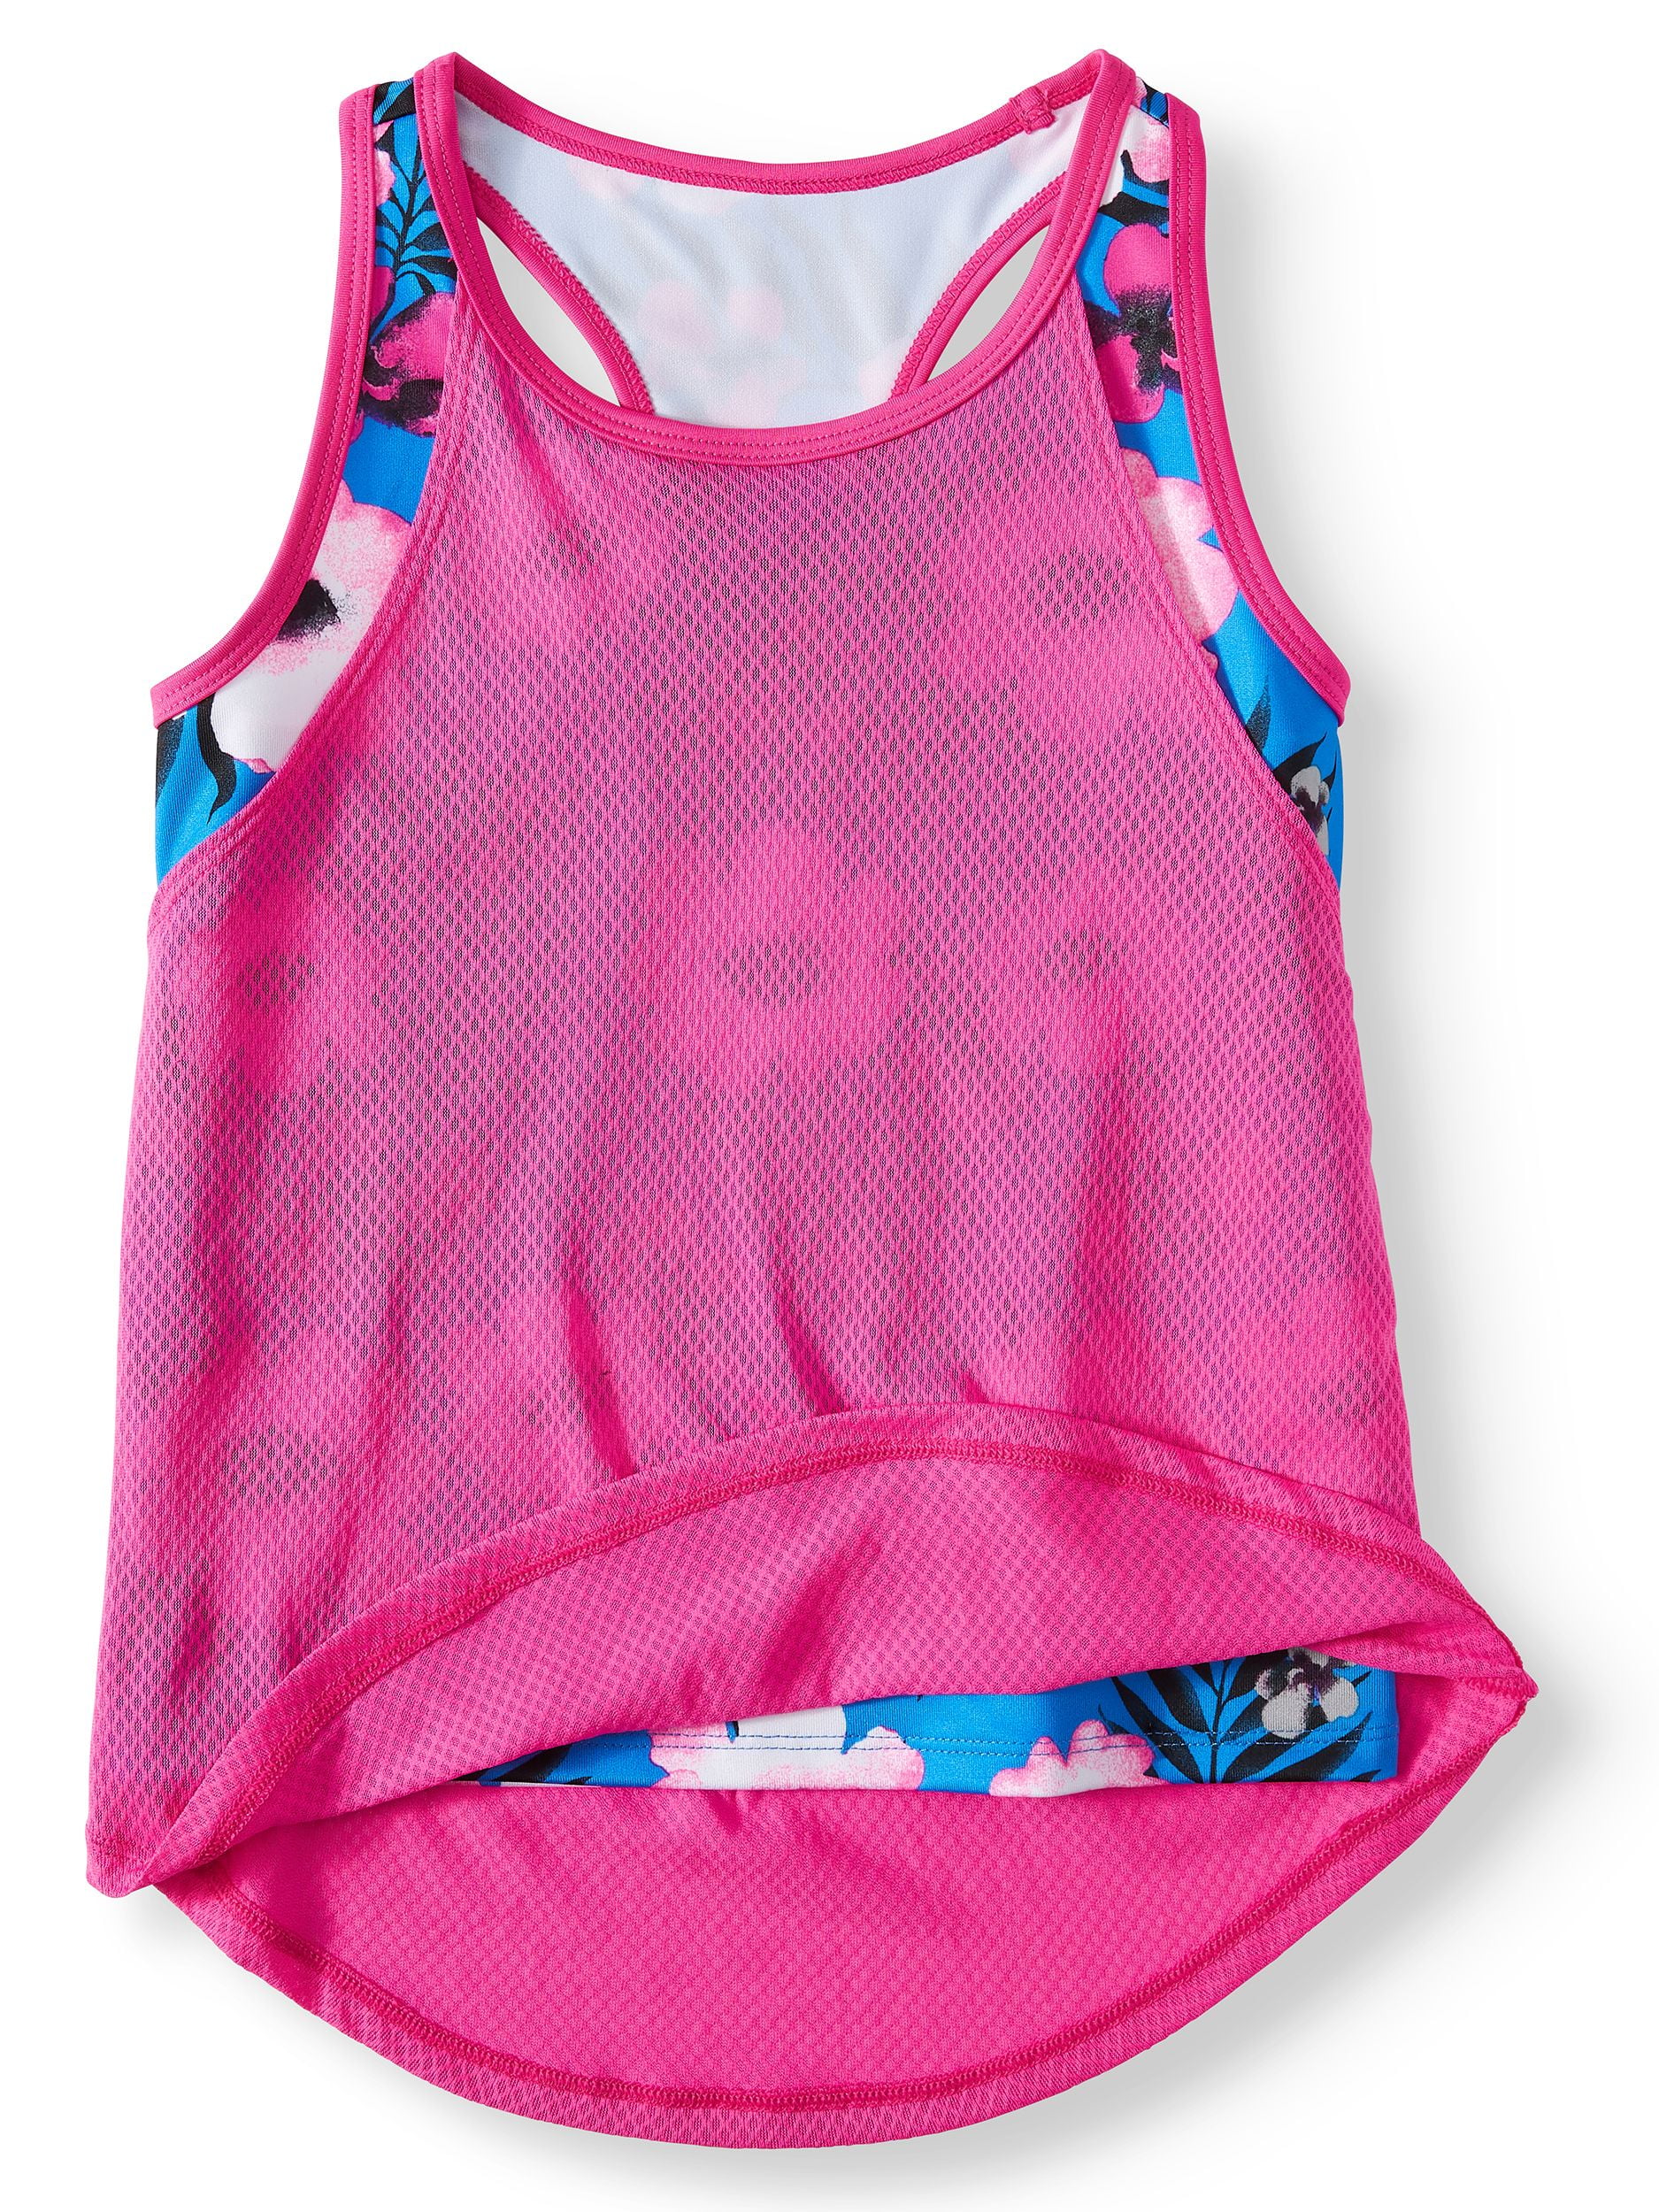 Coral/White Colorblock 2-Fer Athletic Tank Top 14-16 New Avia Girls Size XL